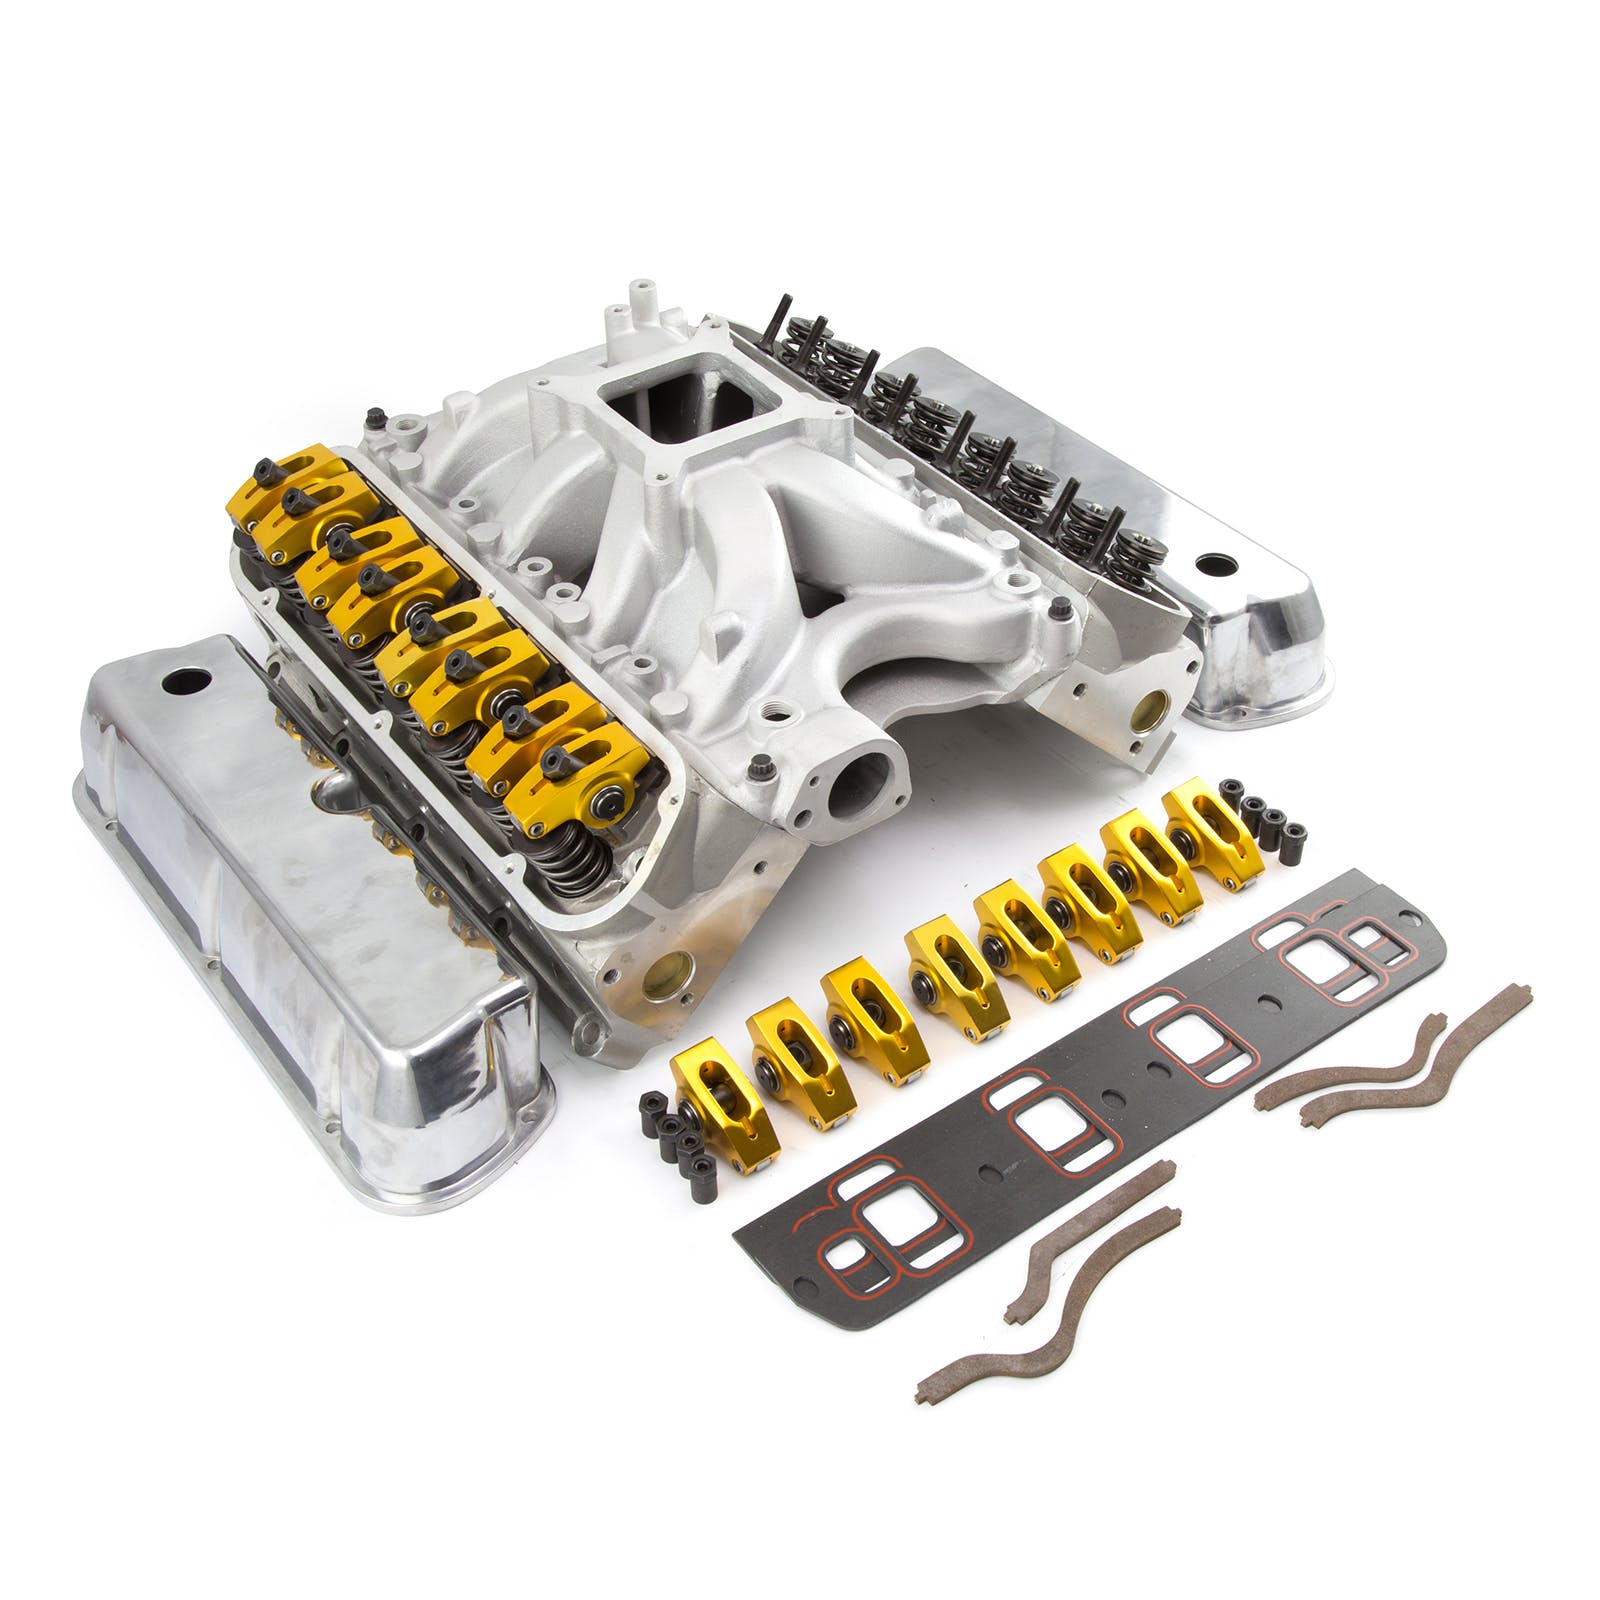 Speedmaster PCE435.1033 Hyd Roller 190cc Cylinder Head Top End Engine Combo Kit